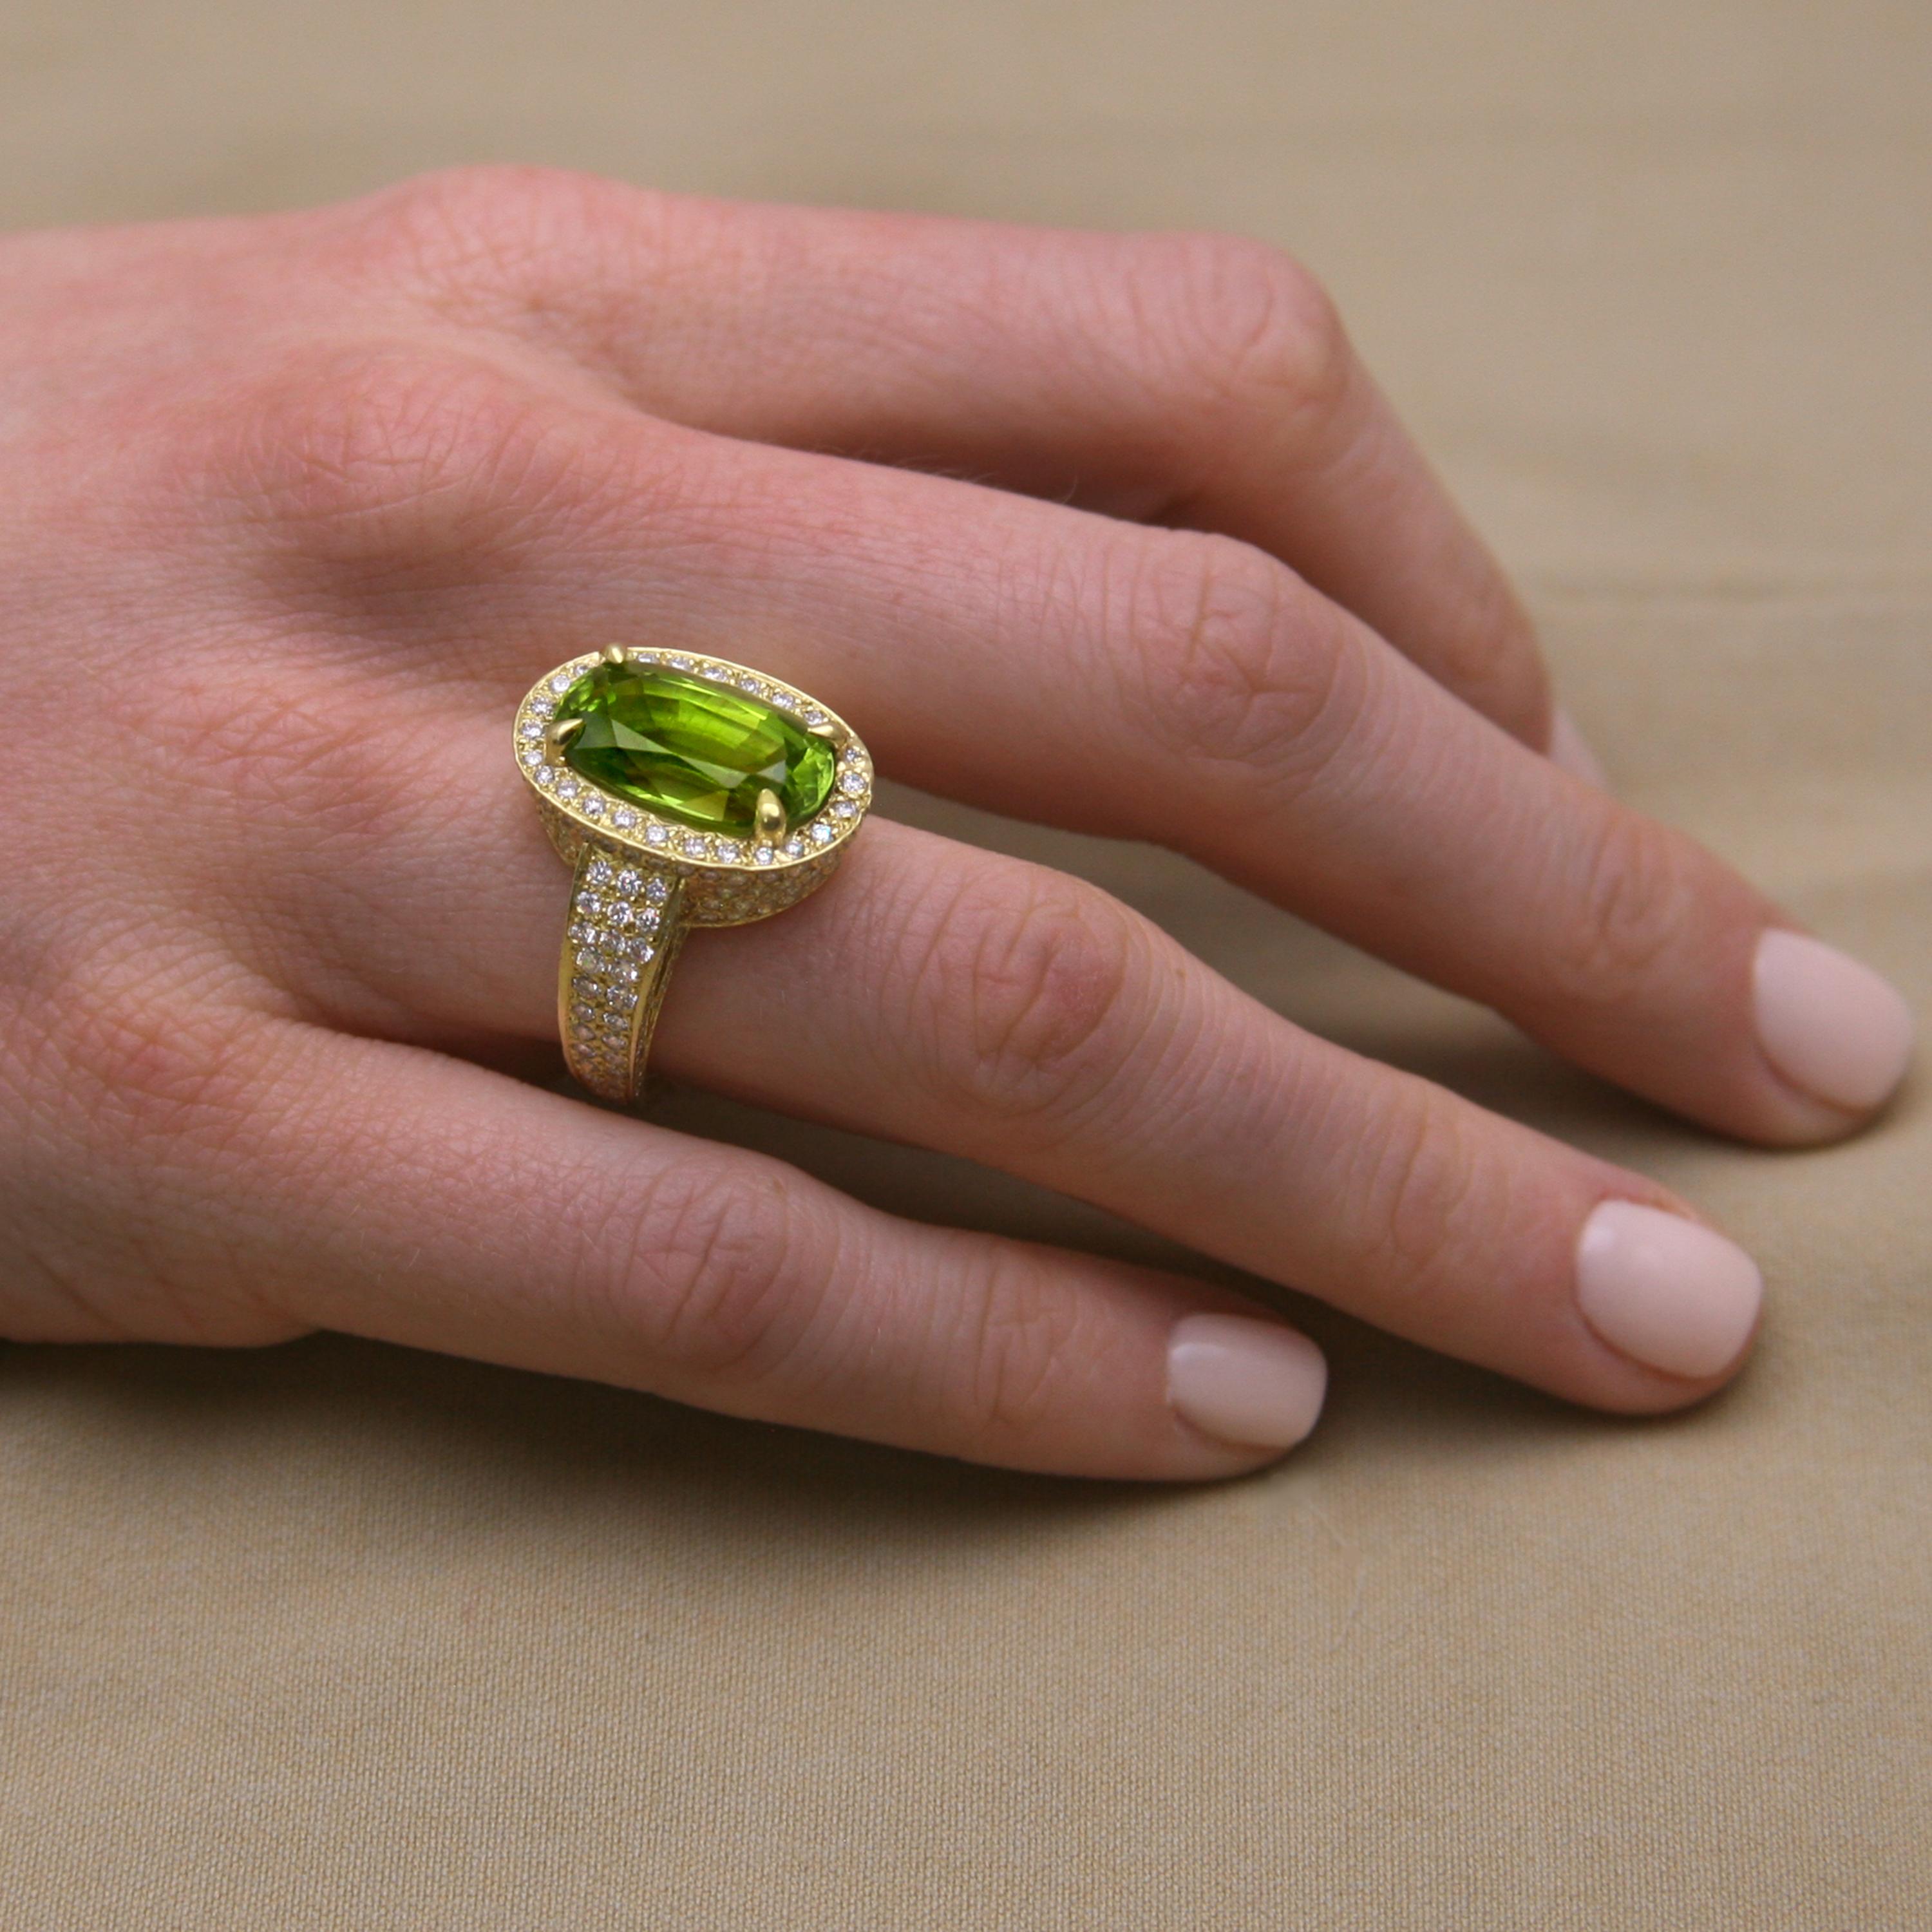 Diana Kim England Burmese Peridot Ring with Micro Pave Diamonds Set in 18k Gold For Sale 3